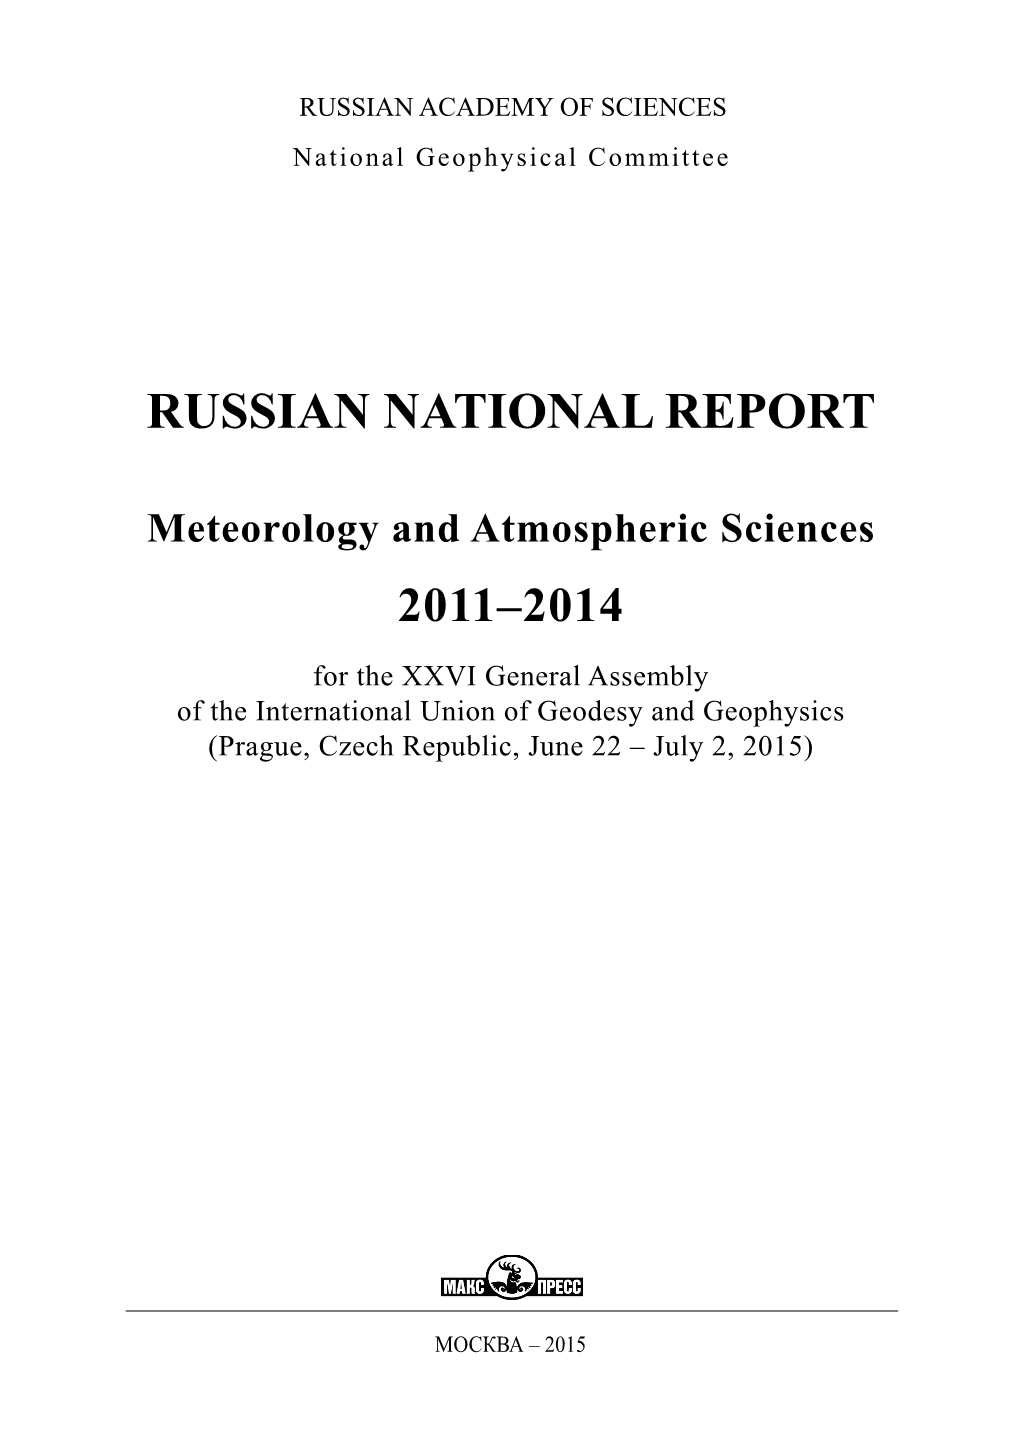 Russian National Report